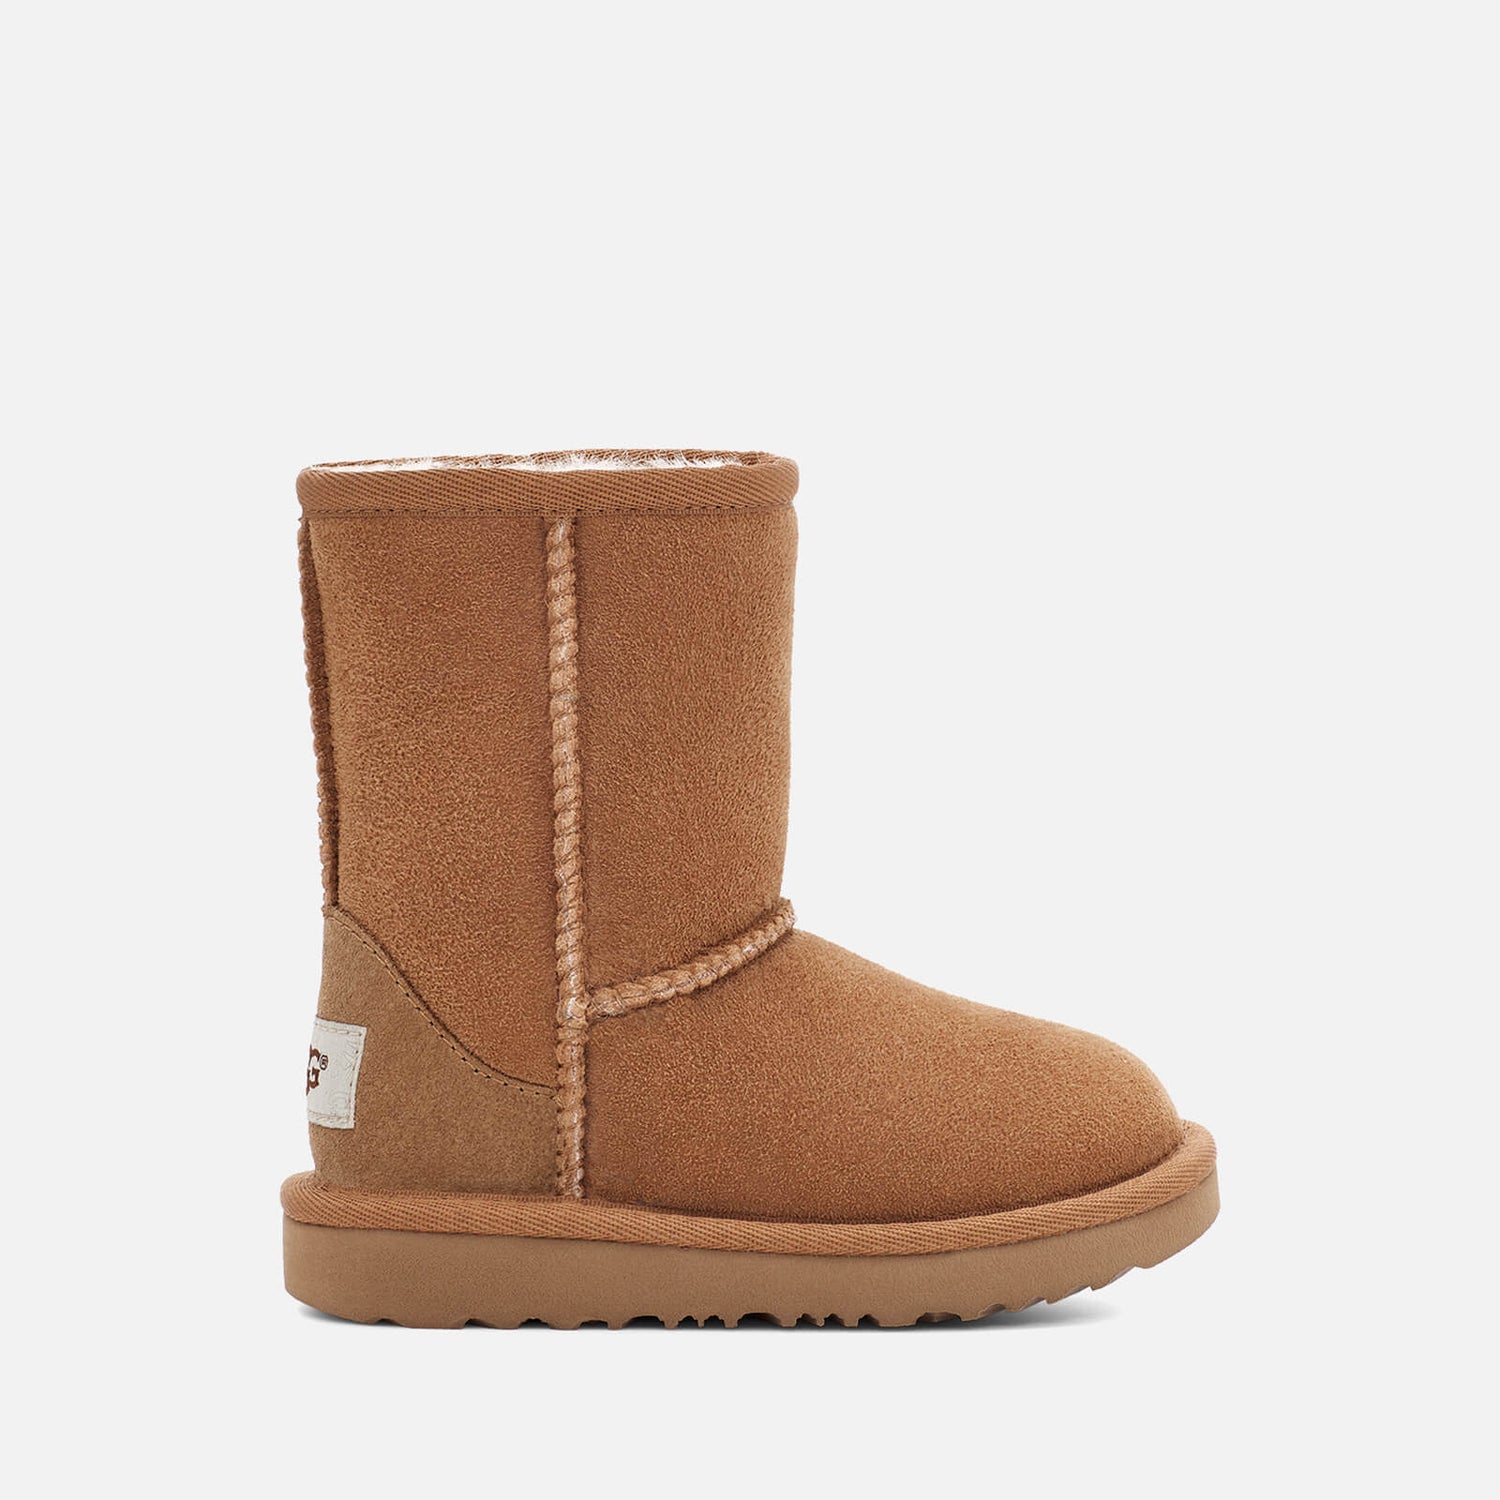 UGG Toddlers' Classic II Waterproof Boots - Chestnut - UK 6 Toddlers